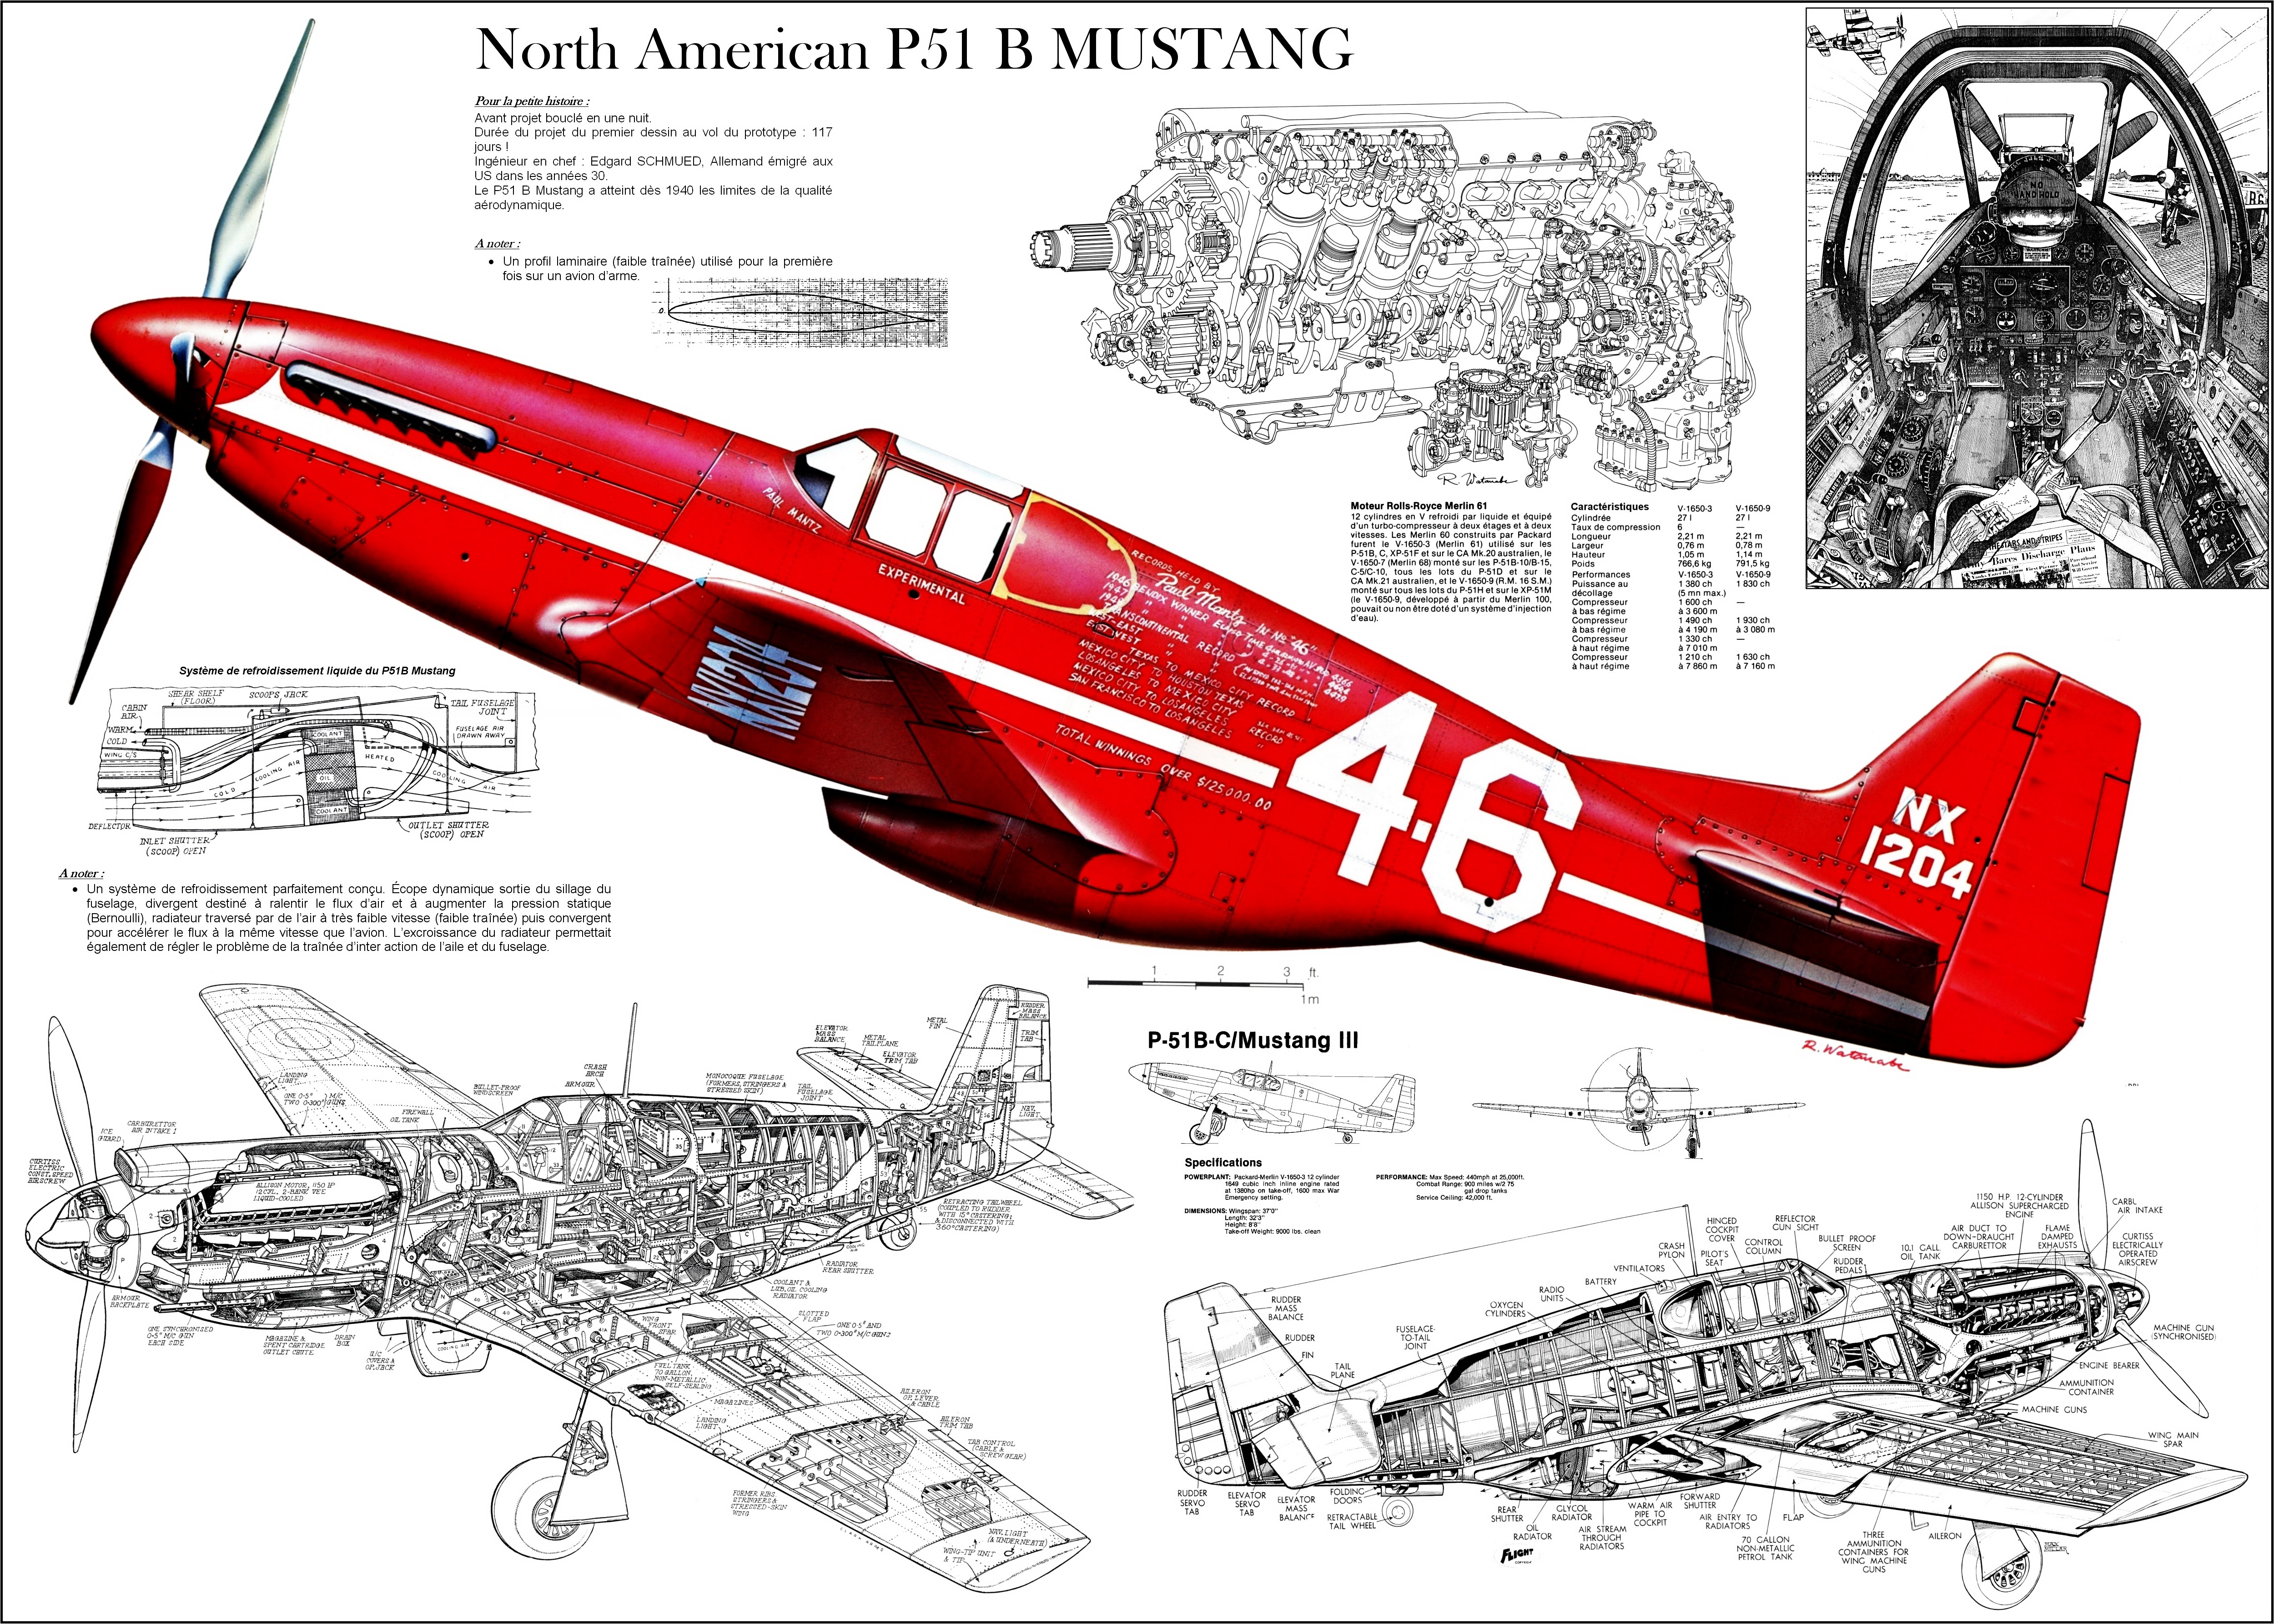 north american p 51 mustang, military, aircraft, schematic, military aircraft